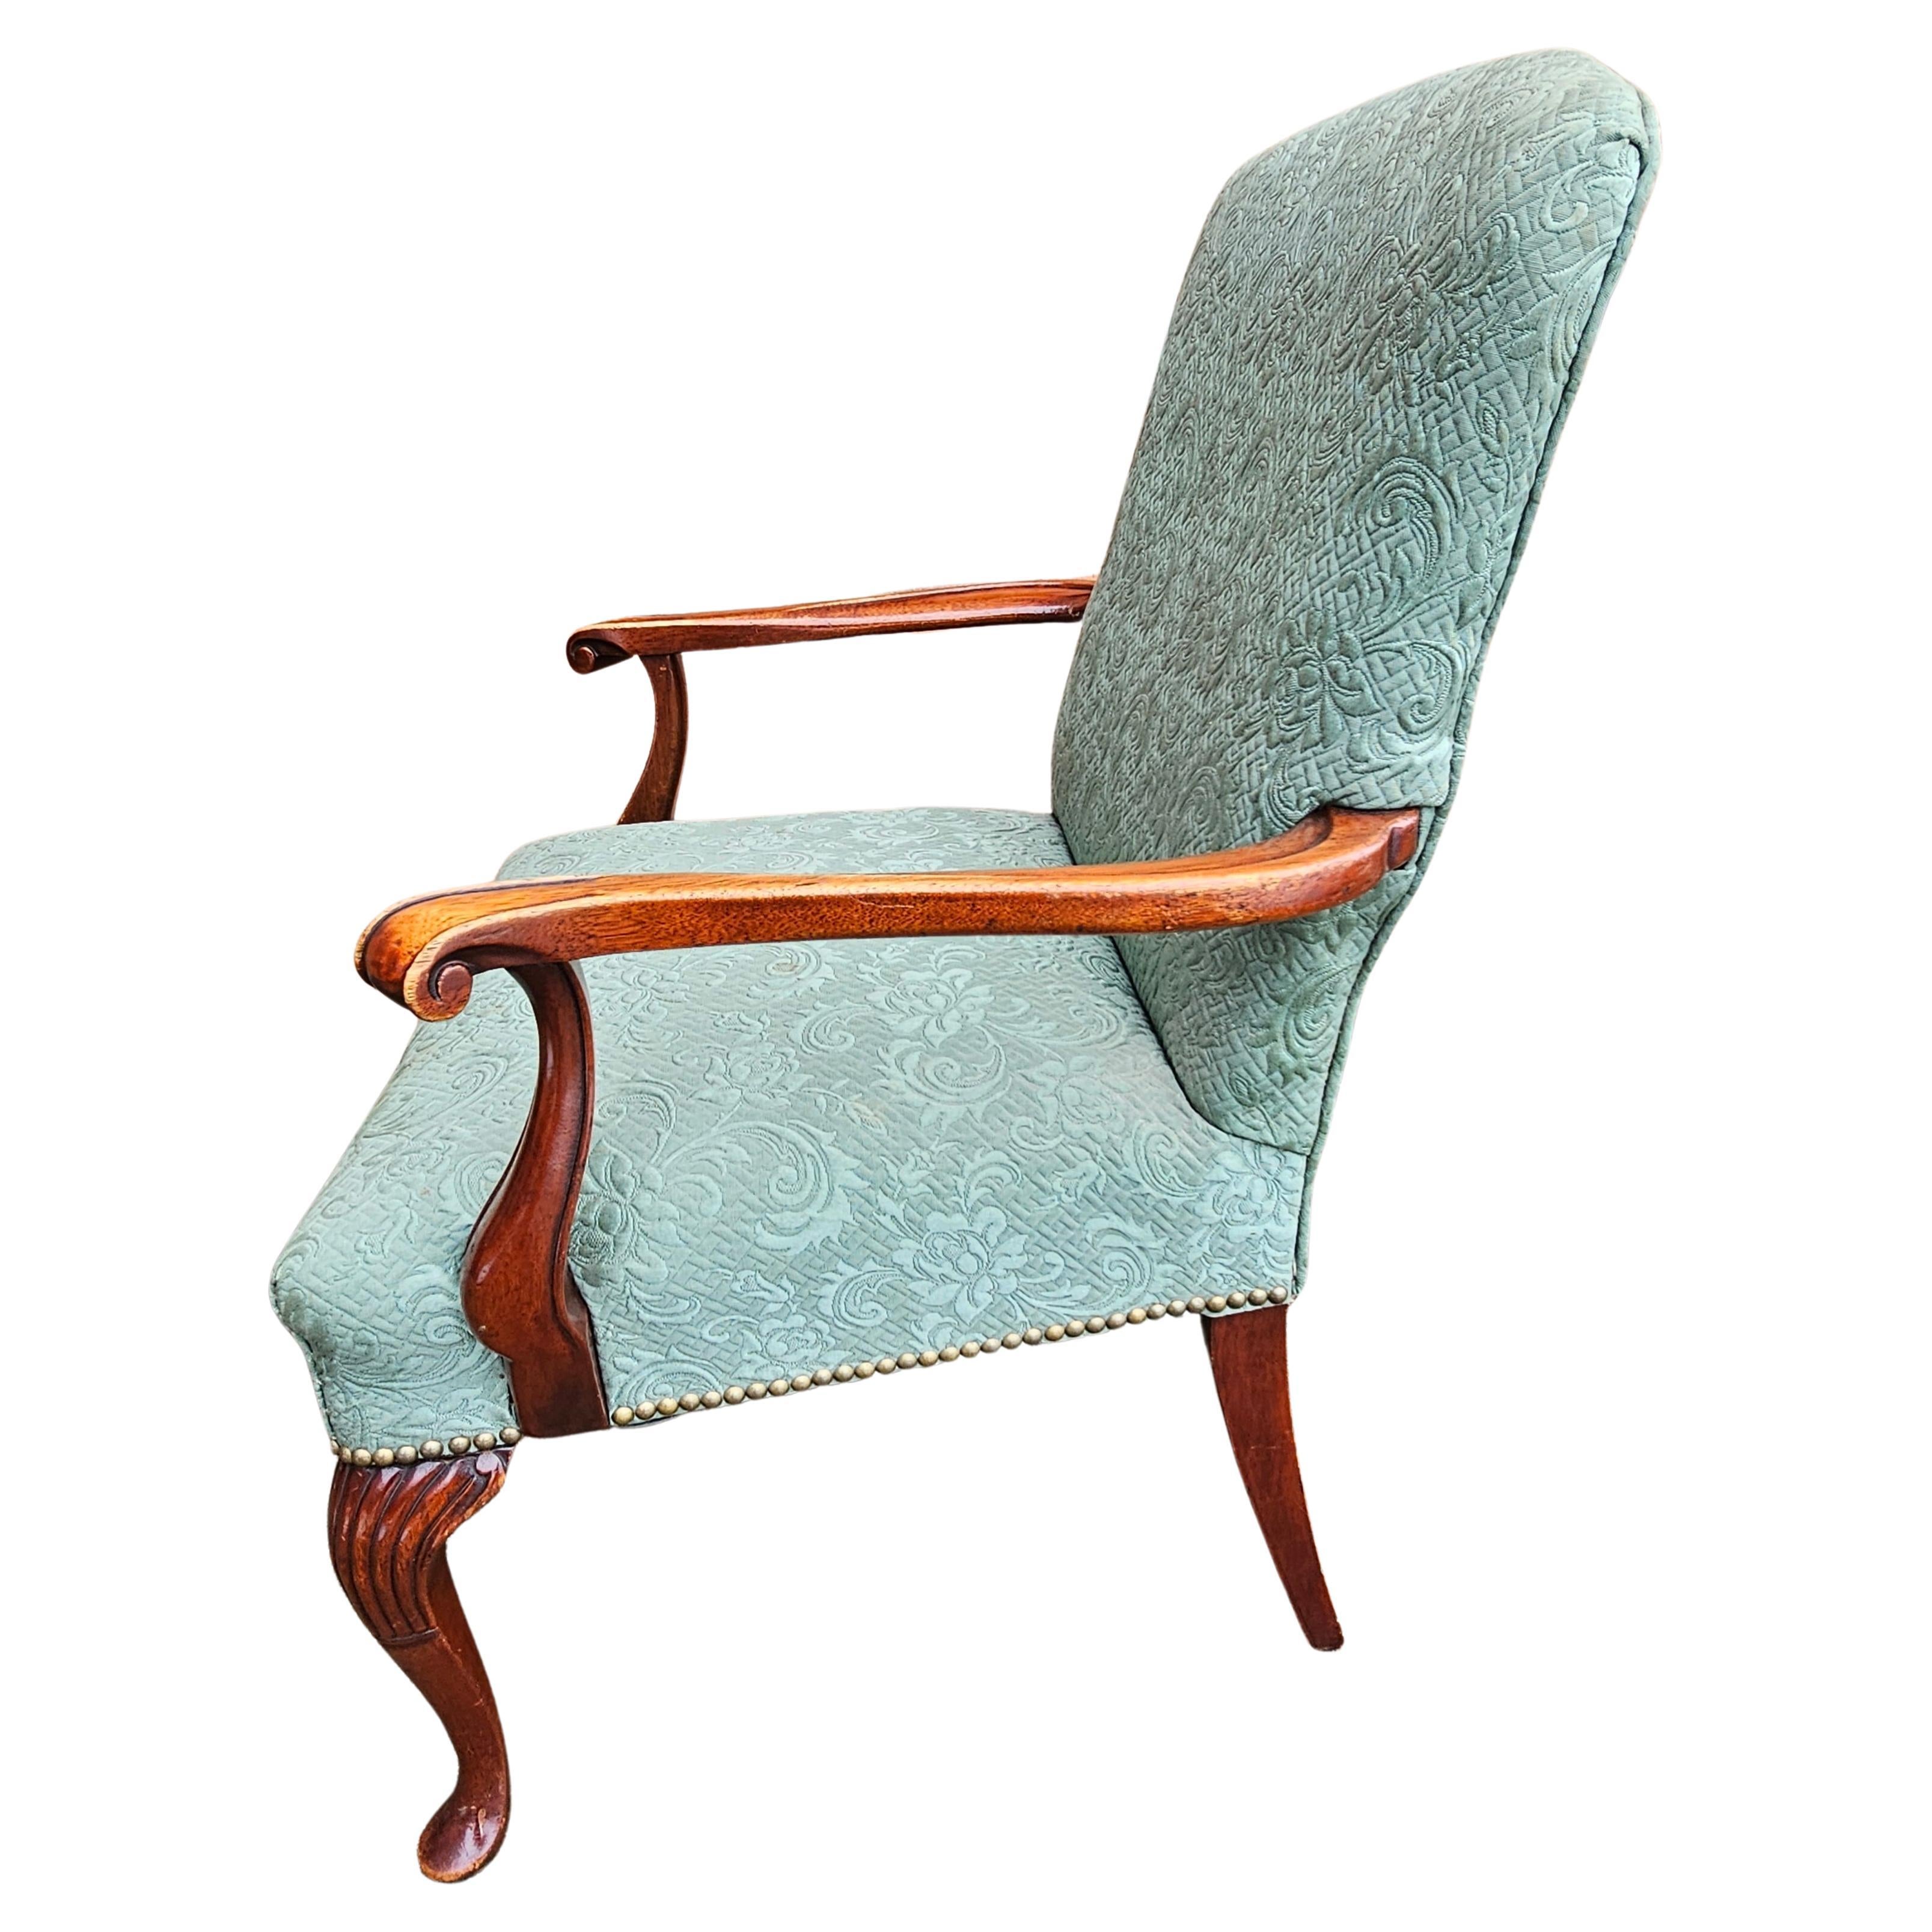 Mid 20th Century Queen Anne Style Mahogany Upholstered Armchair In Good Condition For Sale In Germantown, MD